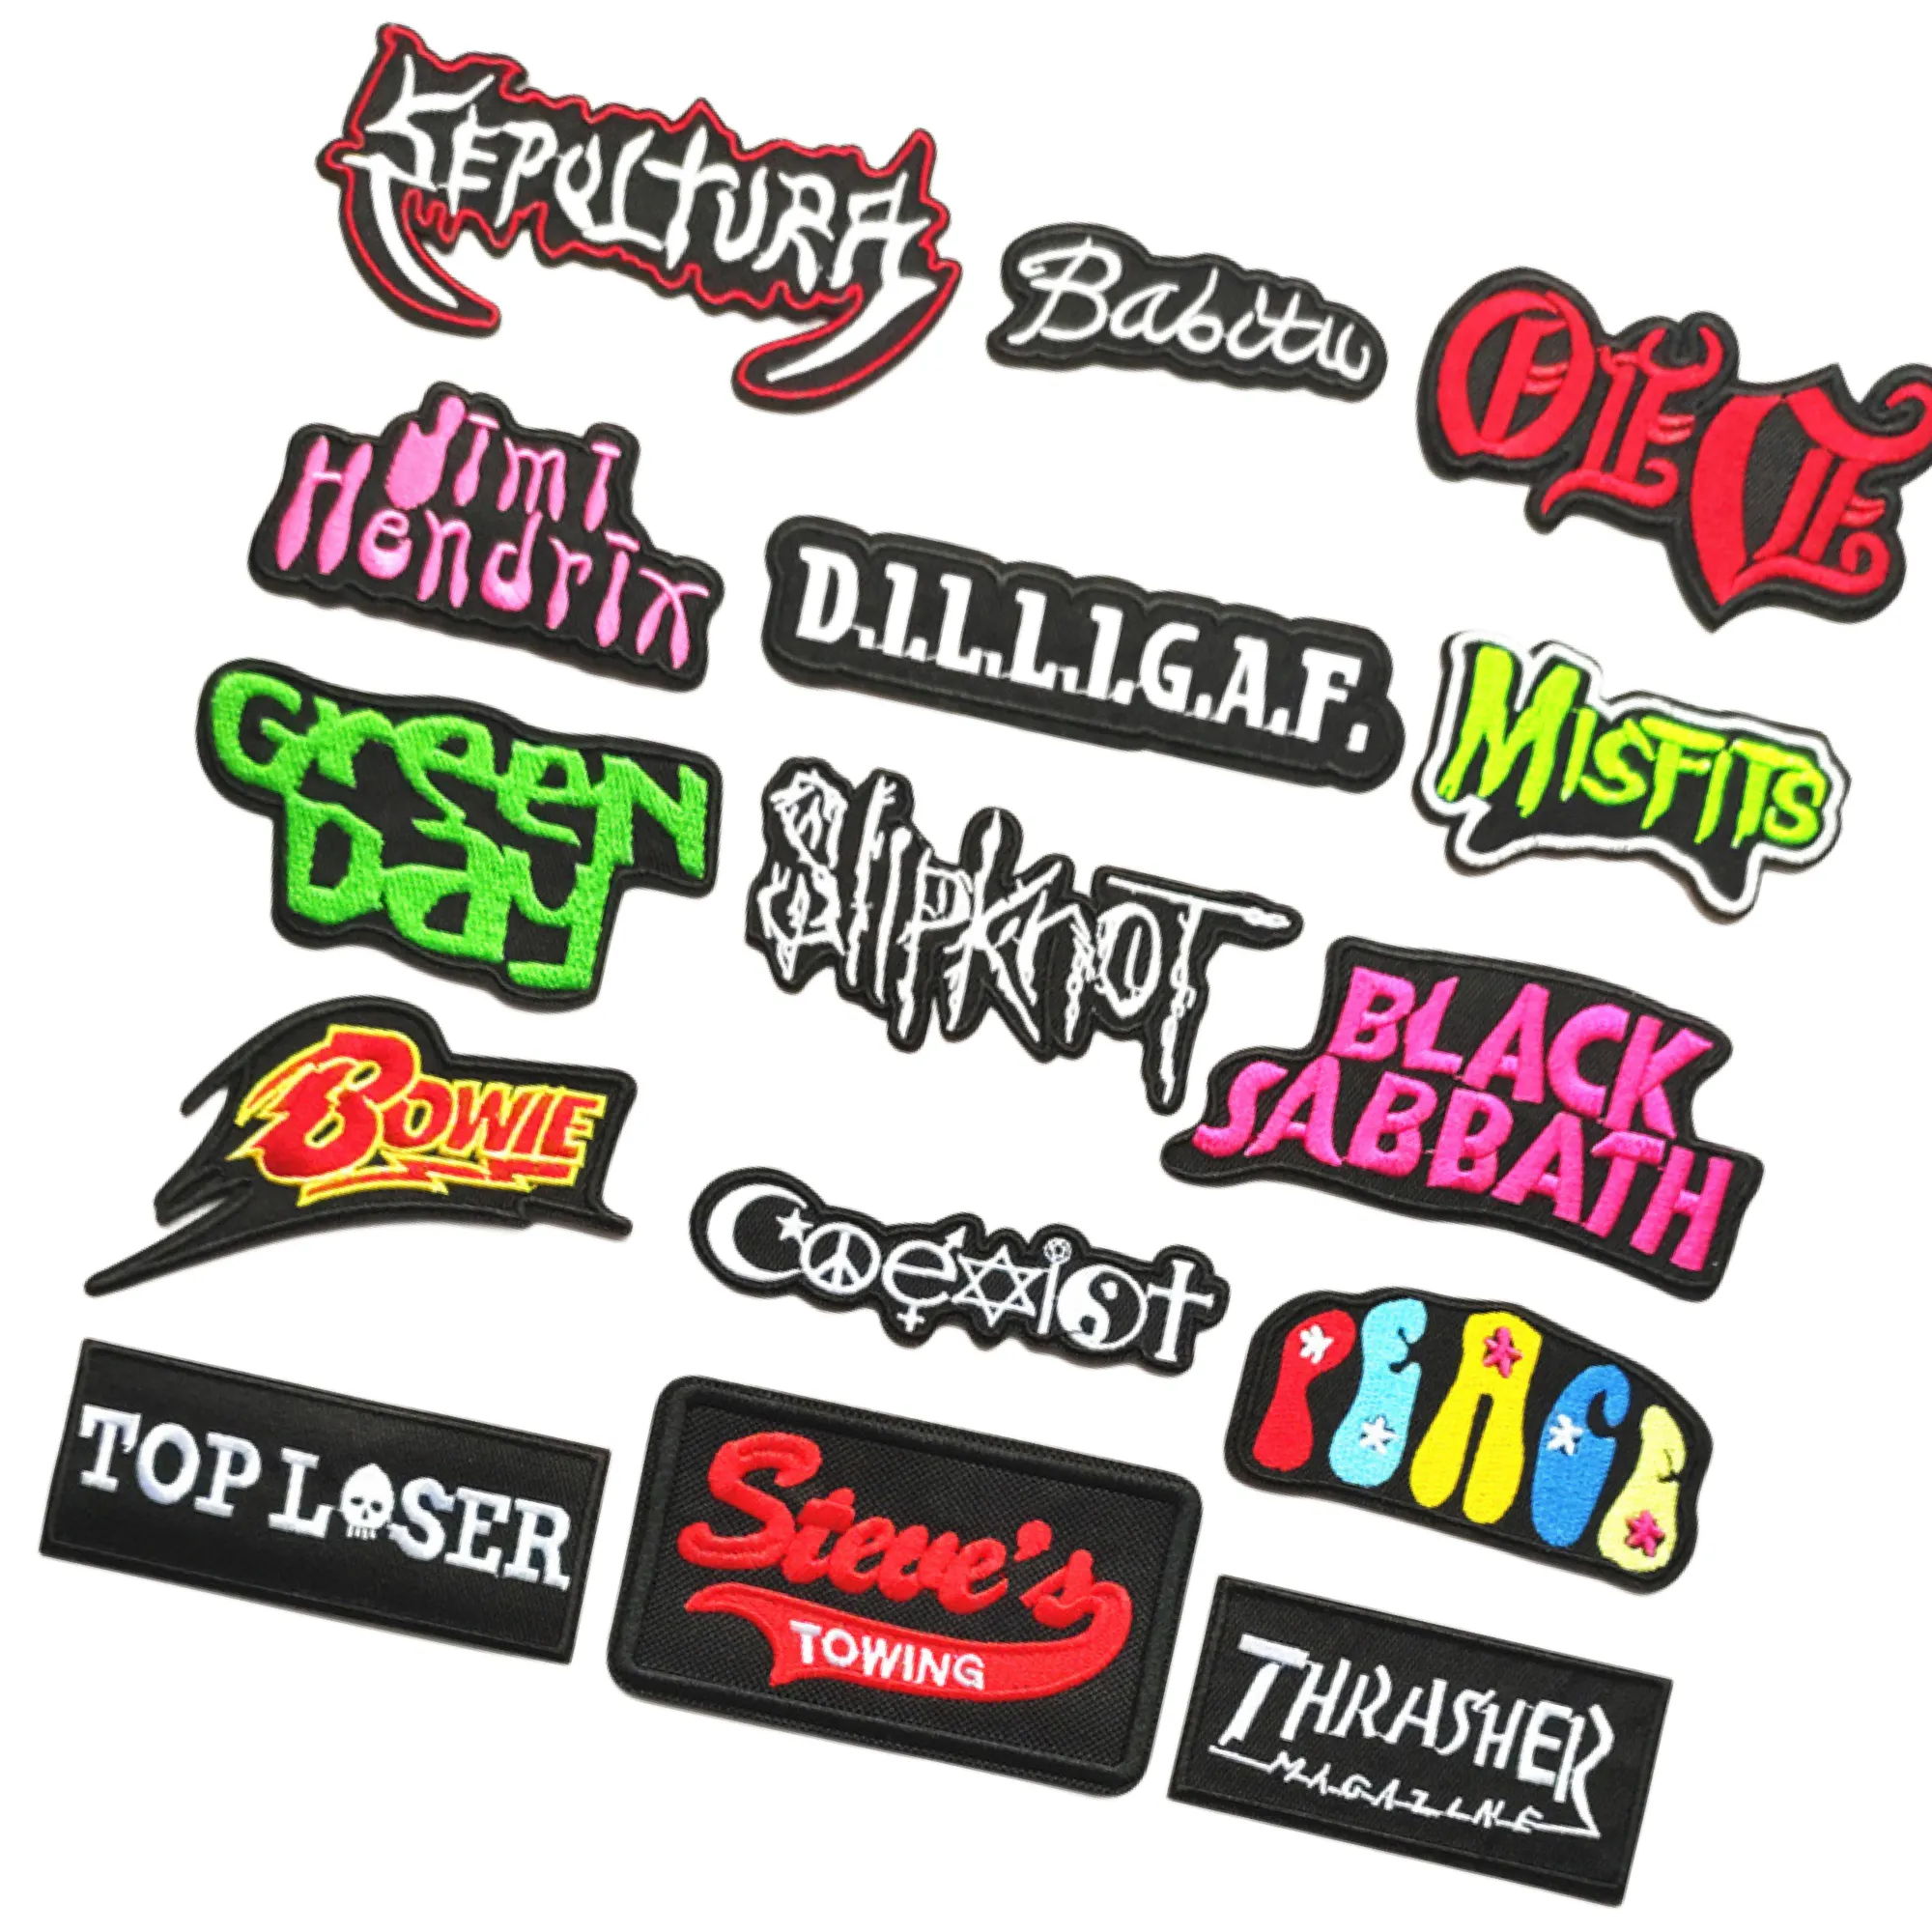 In Stock Patch Manufacturer 3D Personalized Embroidery Patches Heat Press Sew On Iron On Embroidered Patches For Clothing